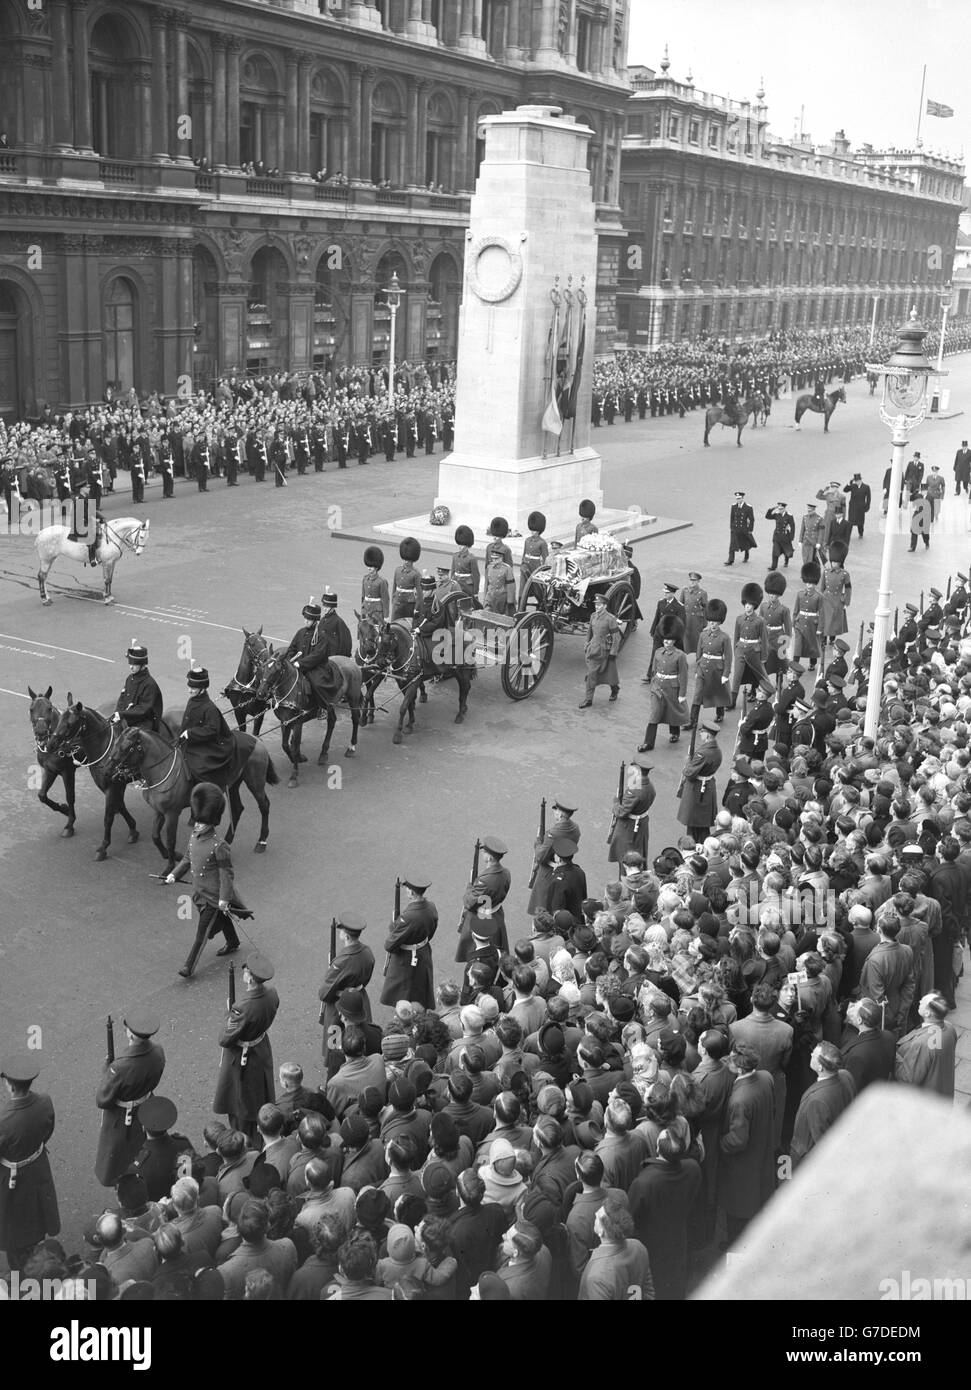 The cortege passing the Cenotaph in Whitehall. Beside the gun-carriage are the Bearer Party, Pall Bearers and following are the four royal Dukes (Windsor, Edinburgh, Gloucester and Kent). Stock Photo